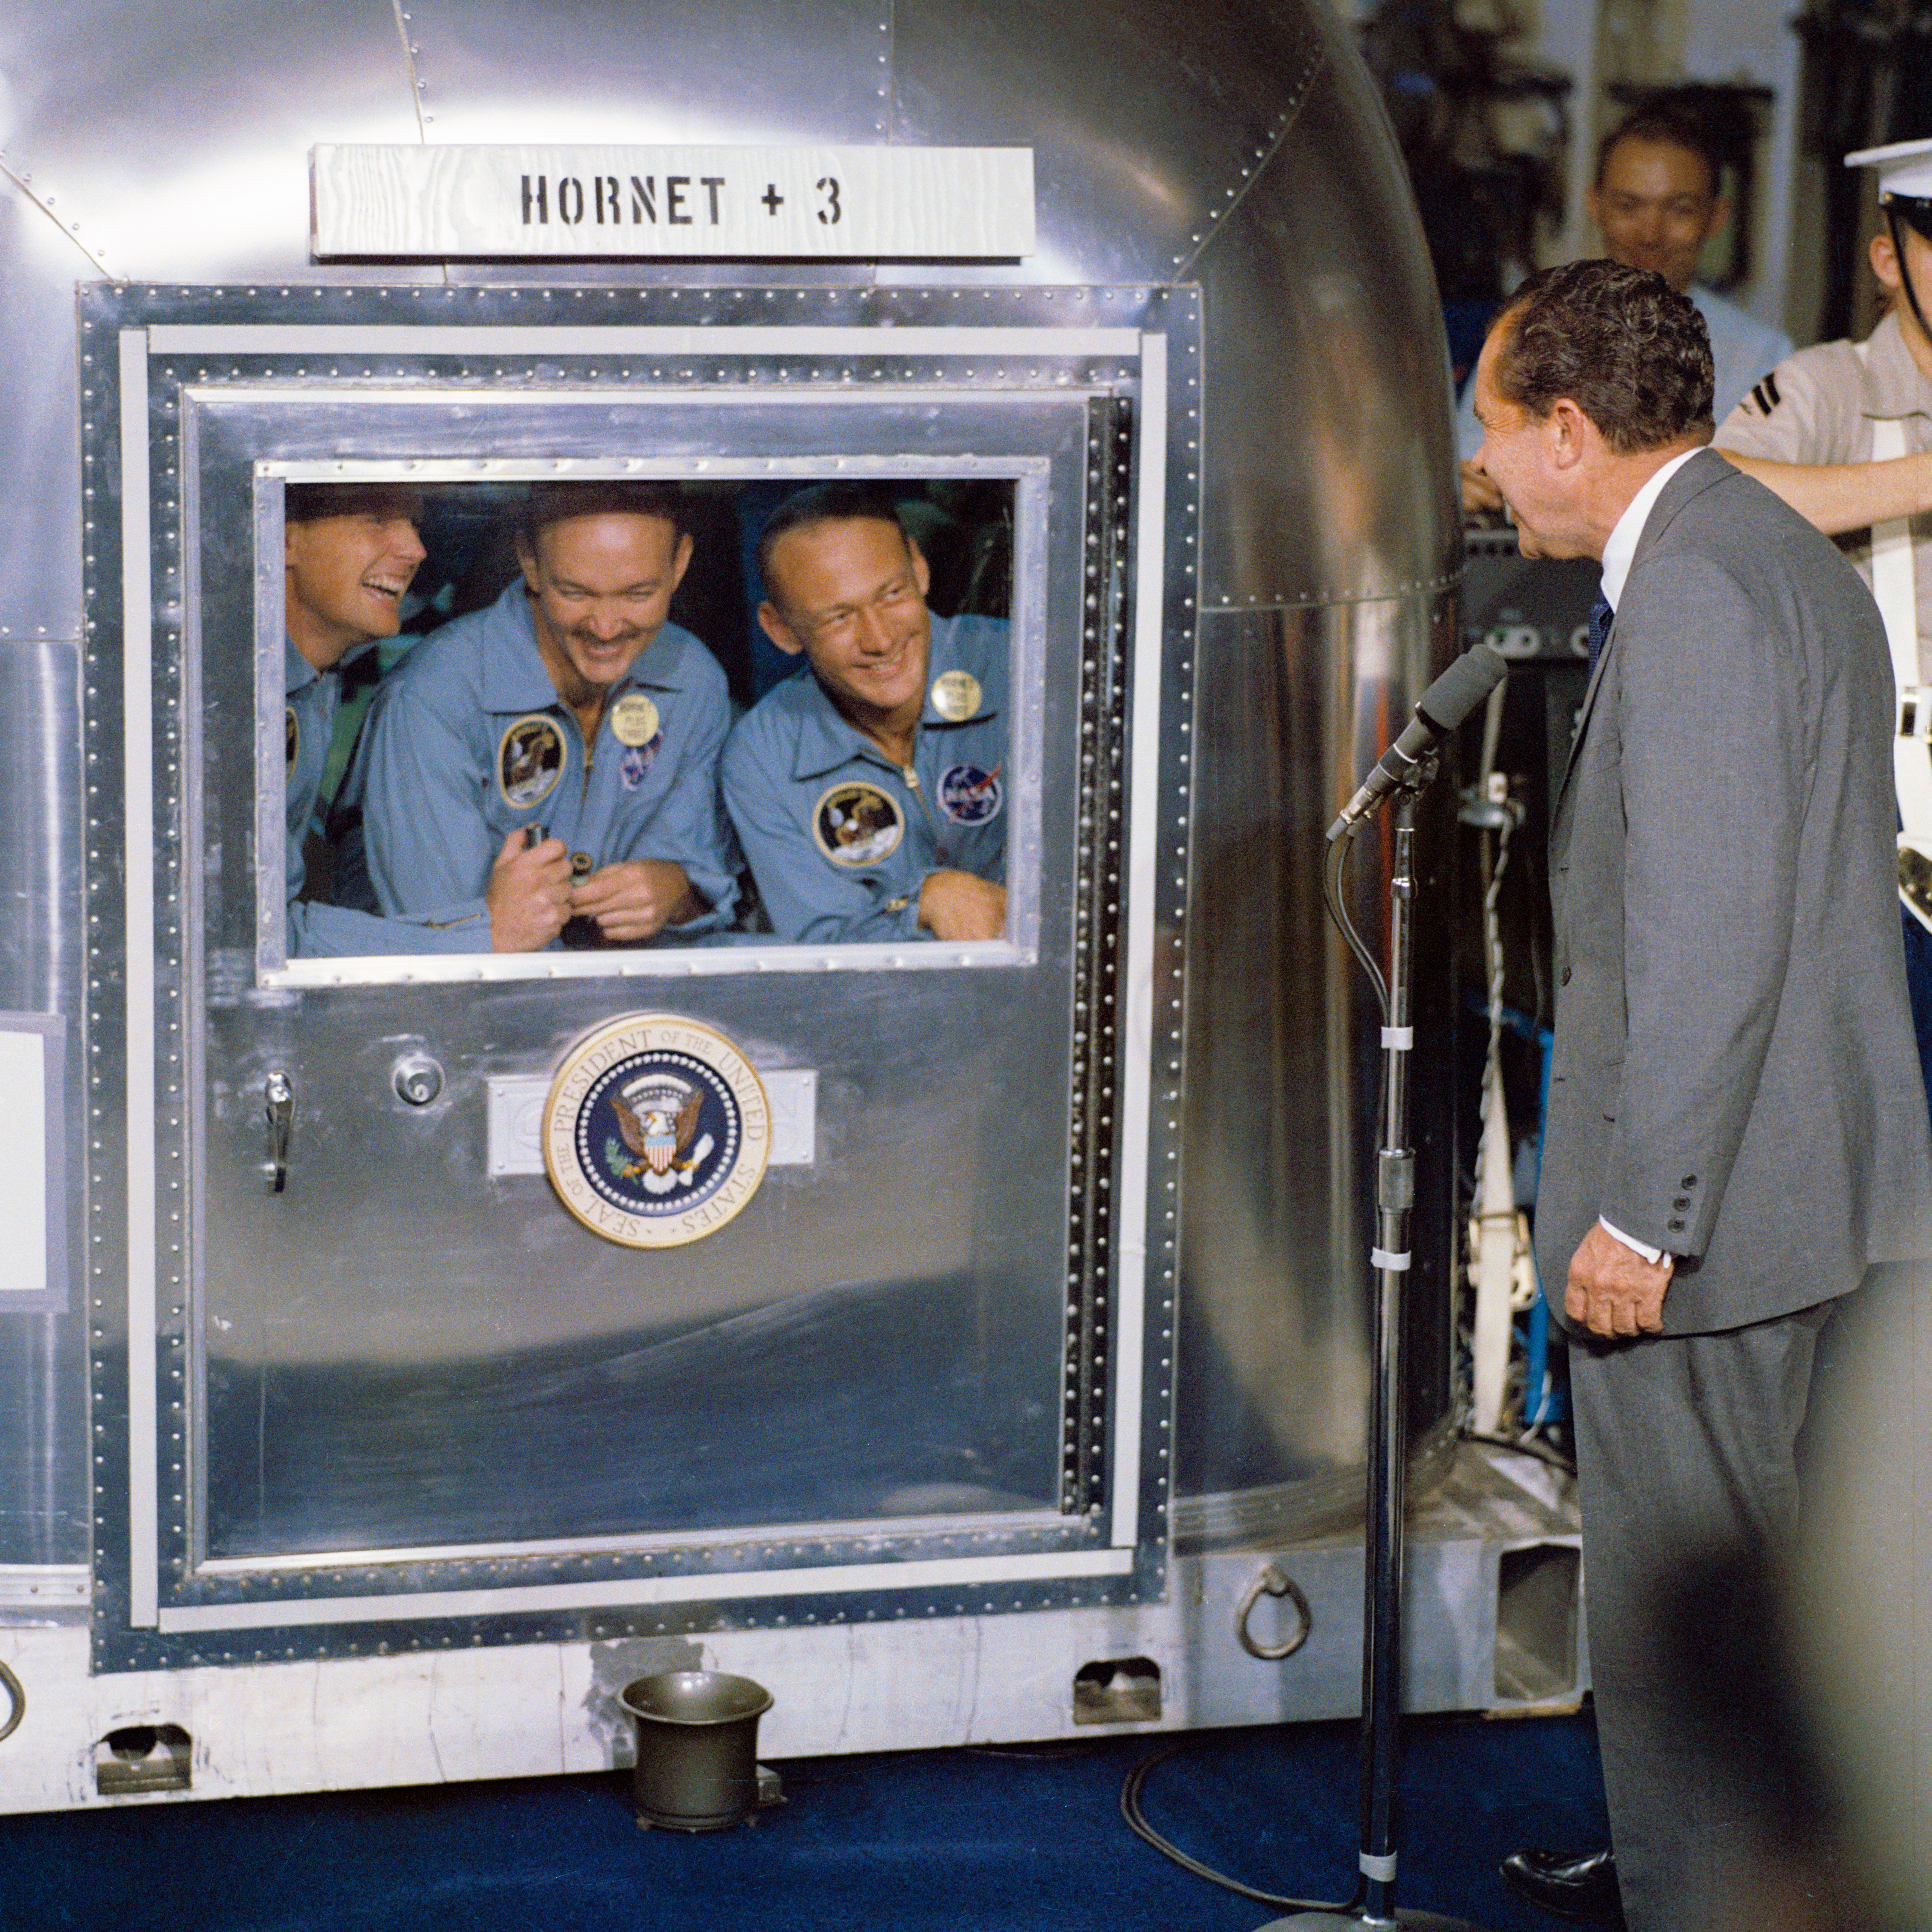 Changed from their BIGs into flight suits, Mike, Neil, and Buzz chat with President Nixon through the MQF's window